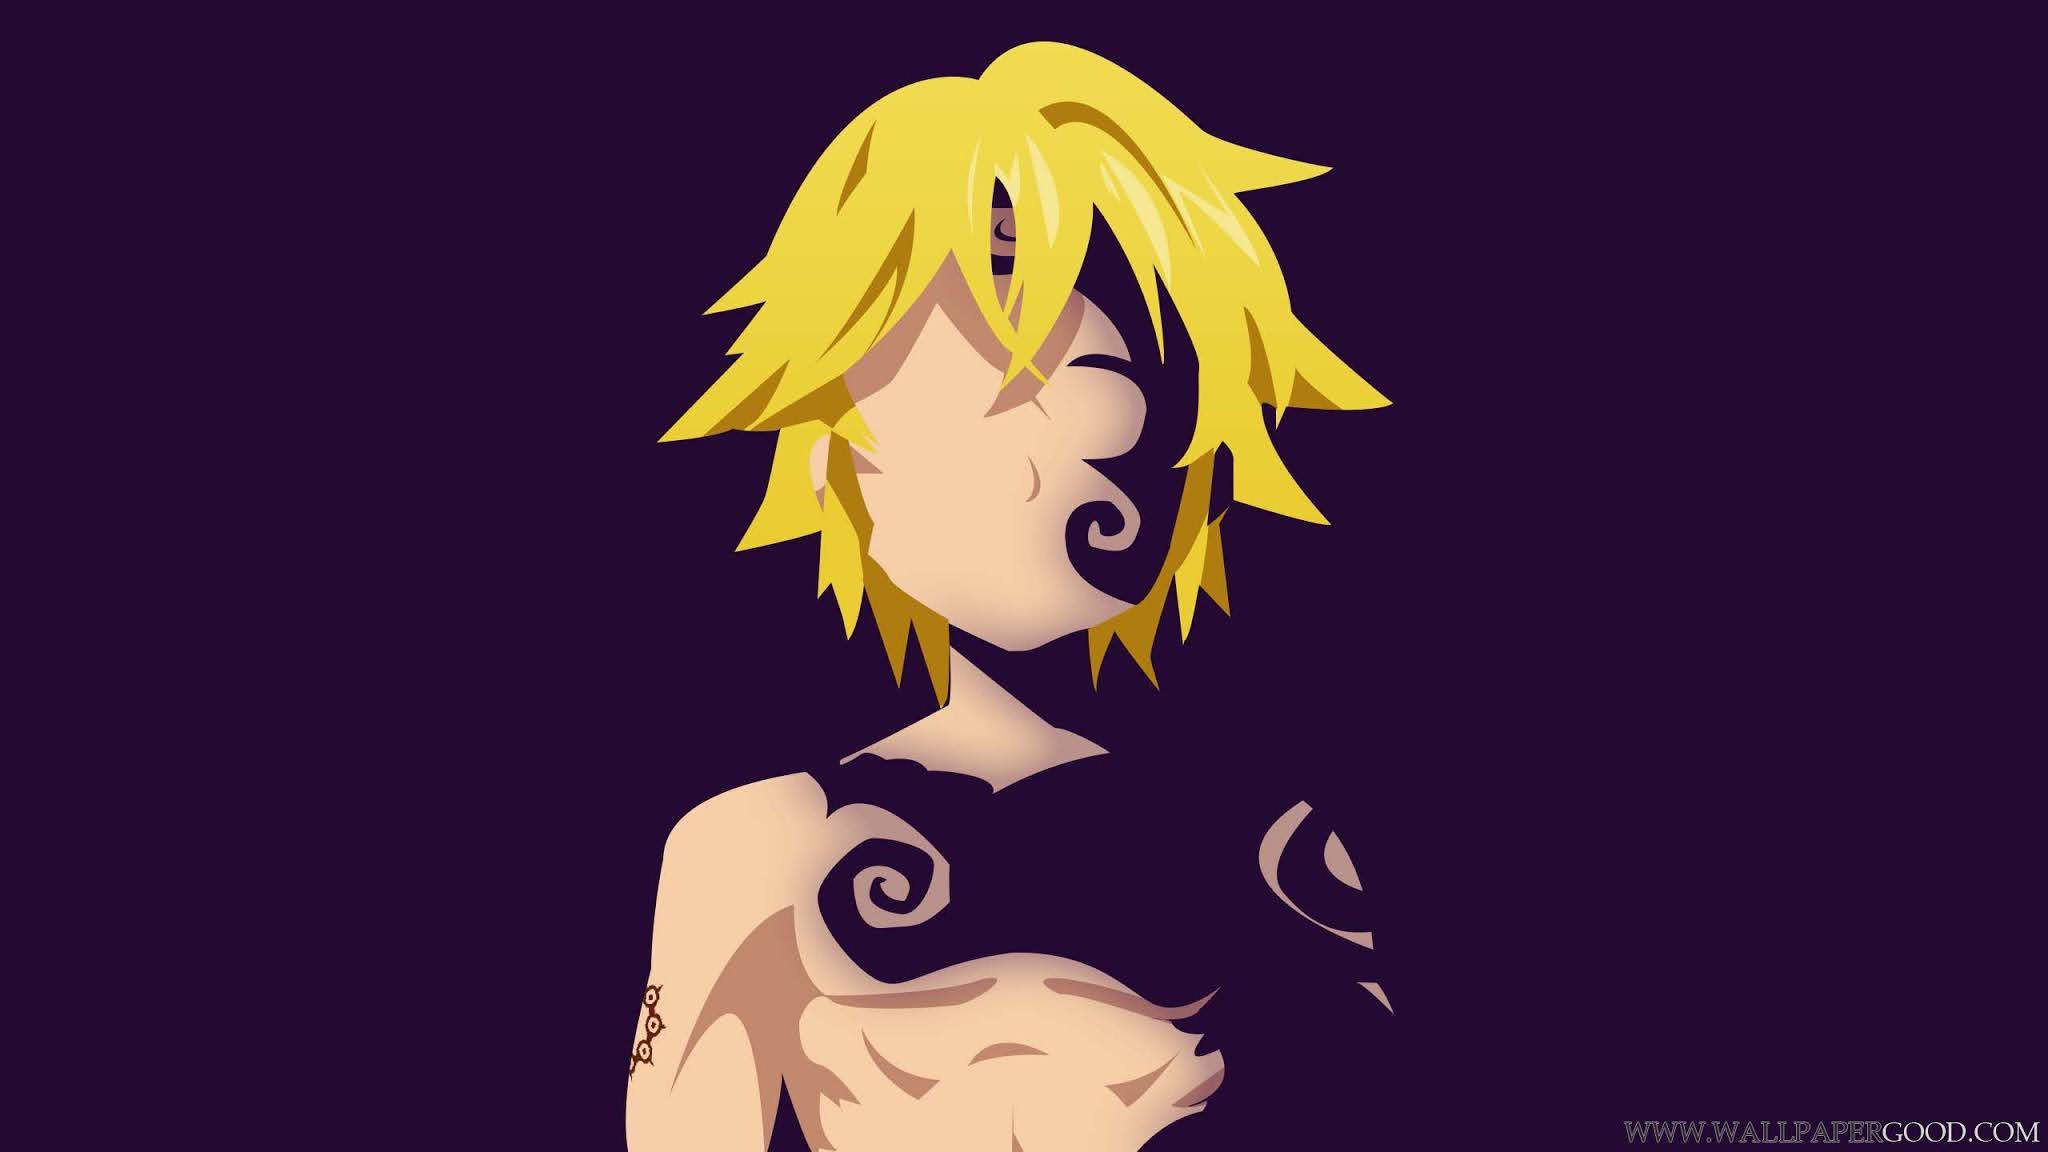 The Seven Deadly Sins Wallpaper For iphone